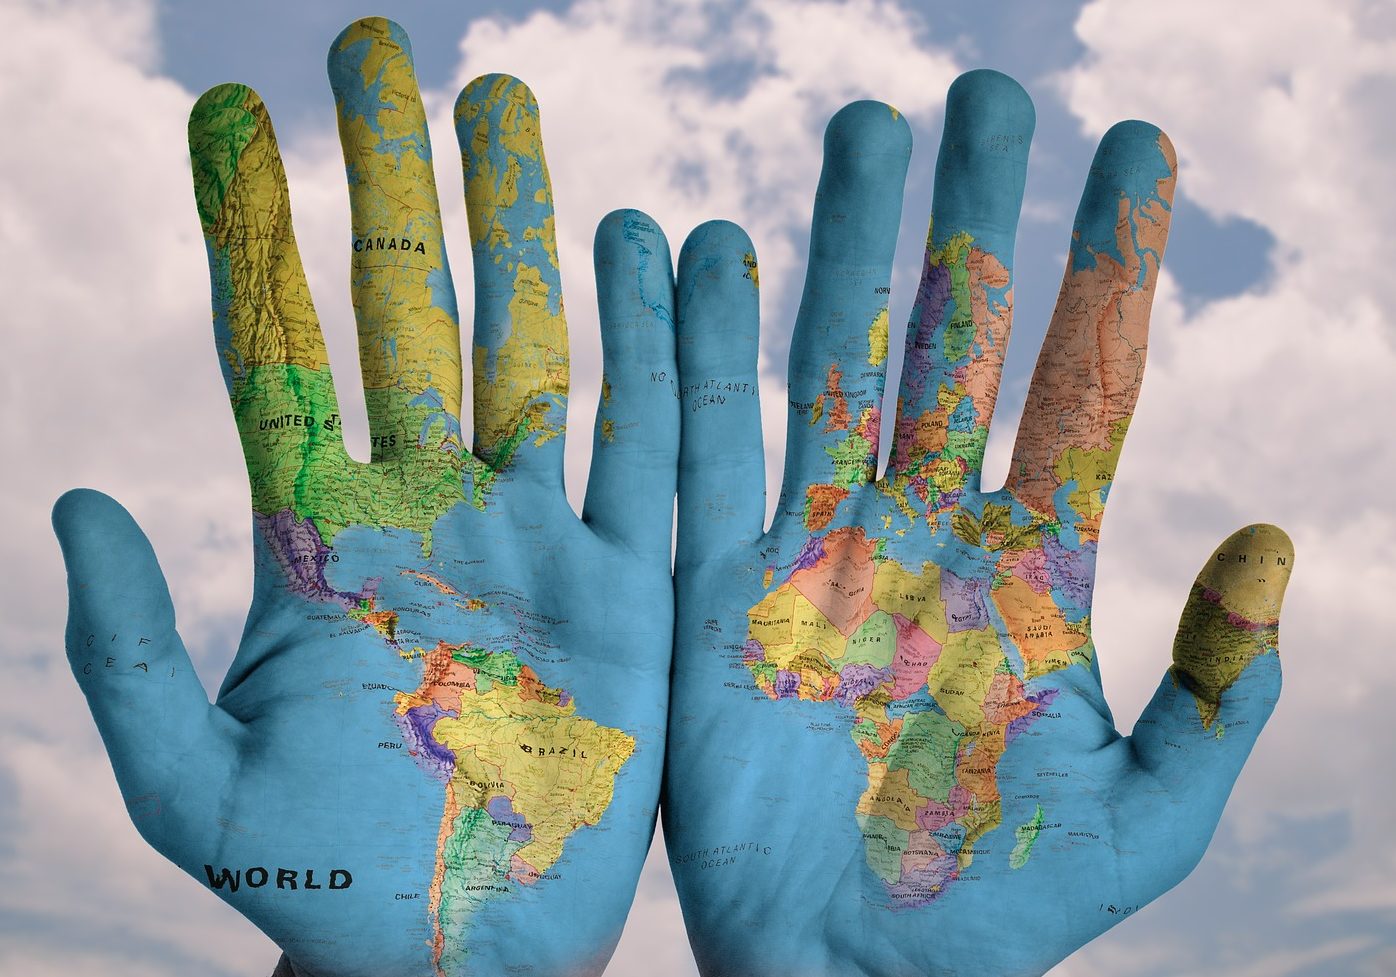 Photograph of someone holding their hands next to one another. A map of the world is superimposed on the hands.